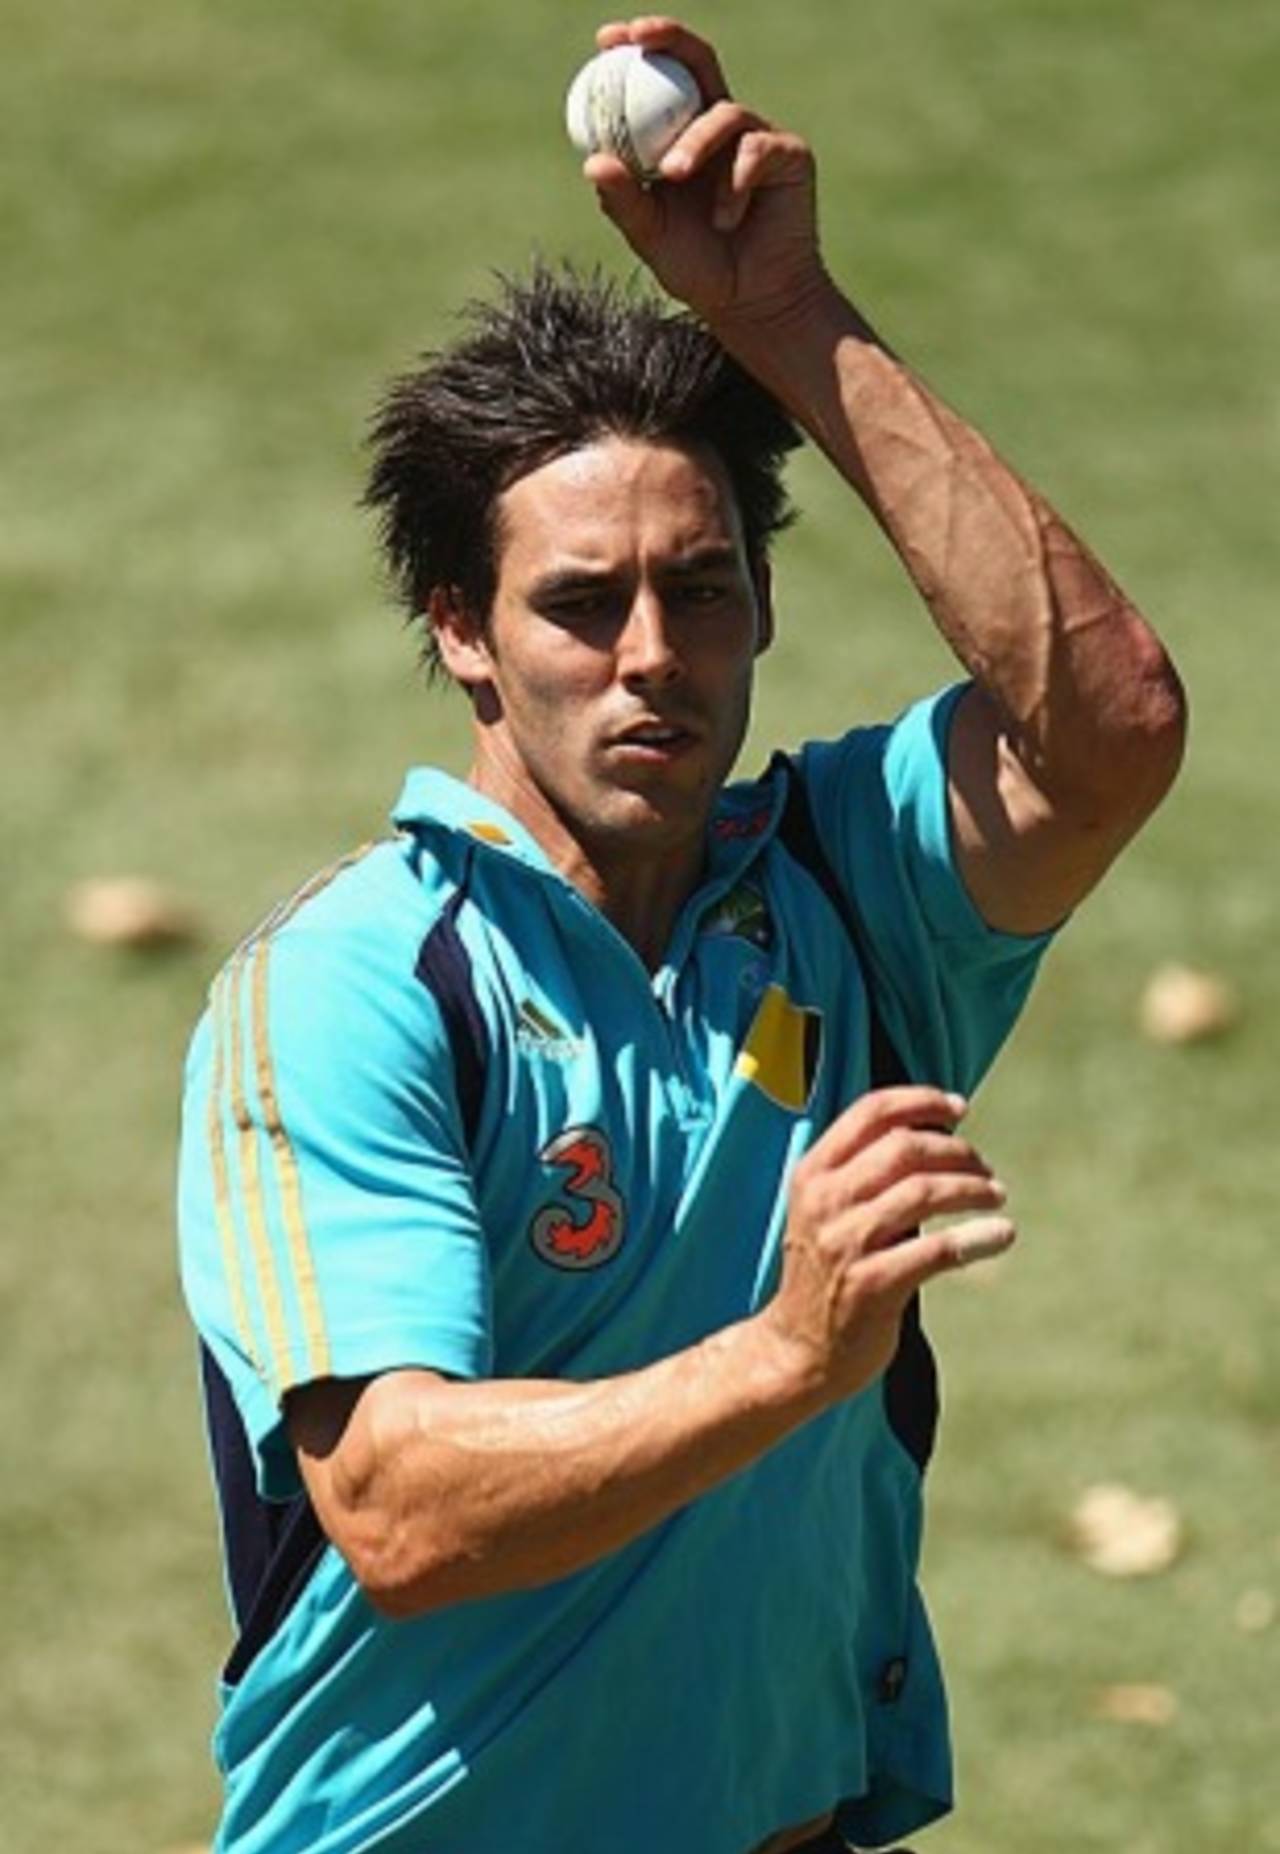 Mitchell Johnson gets ready to bowl at the nets, Perth, January 28, 2010